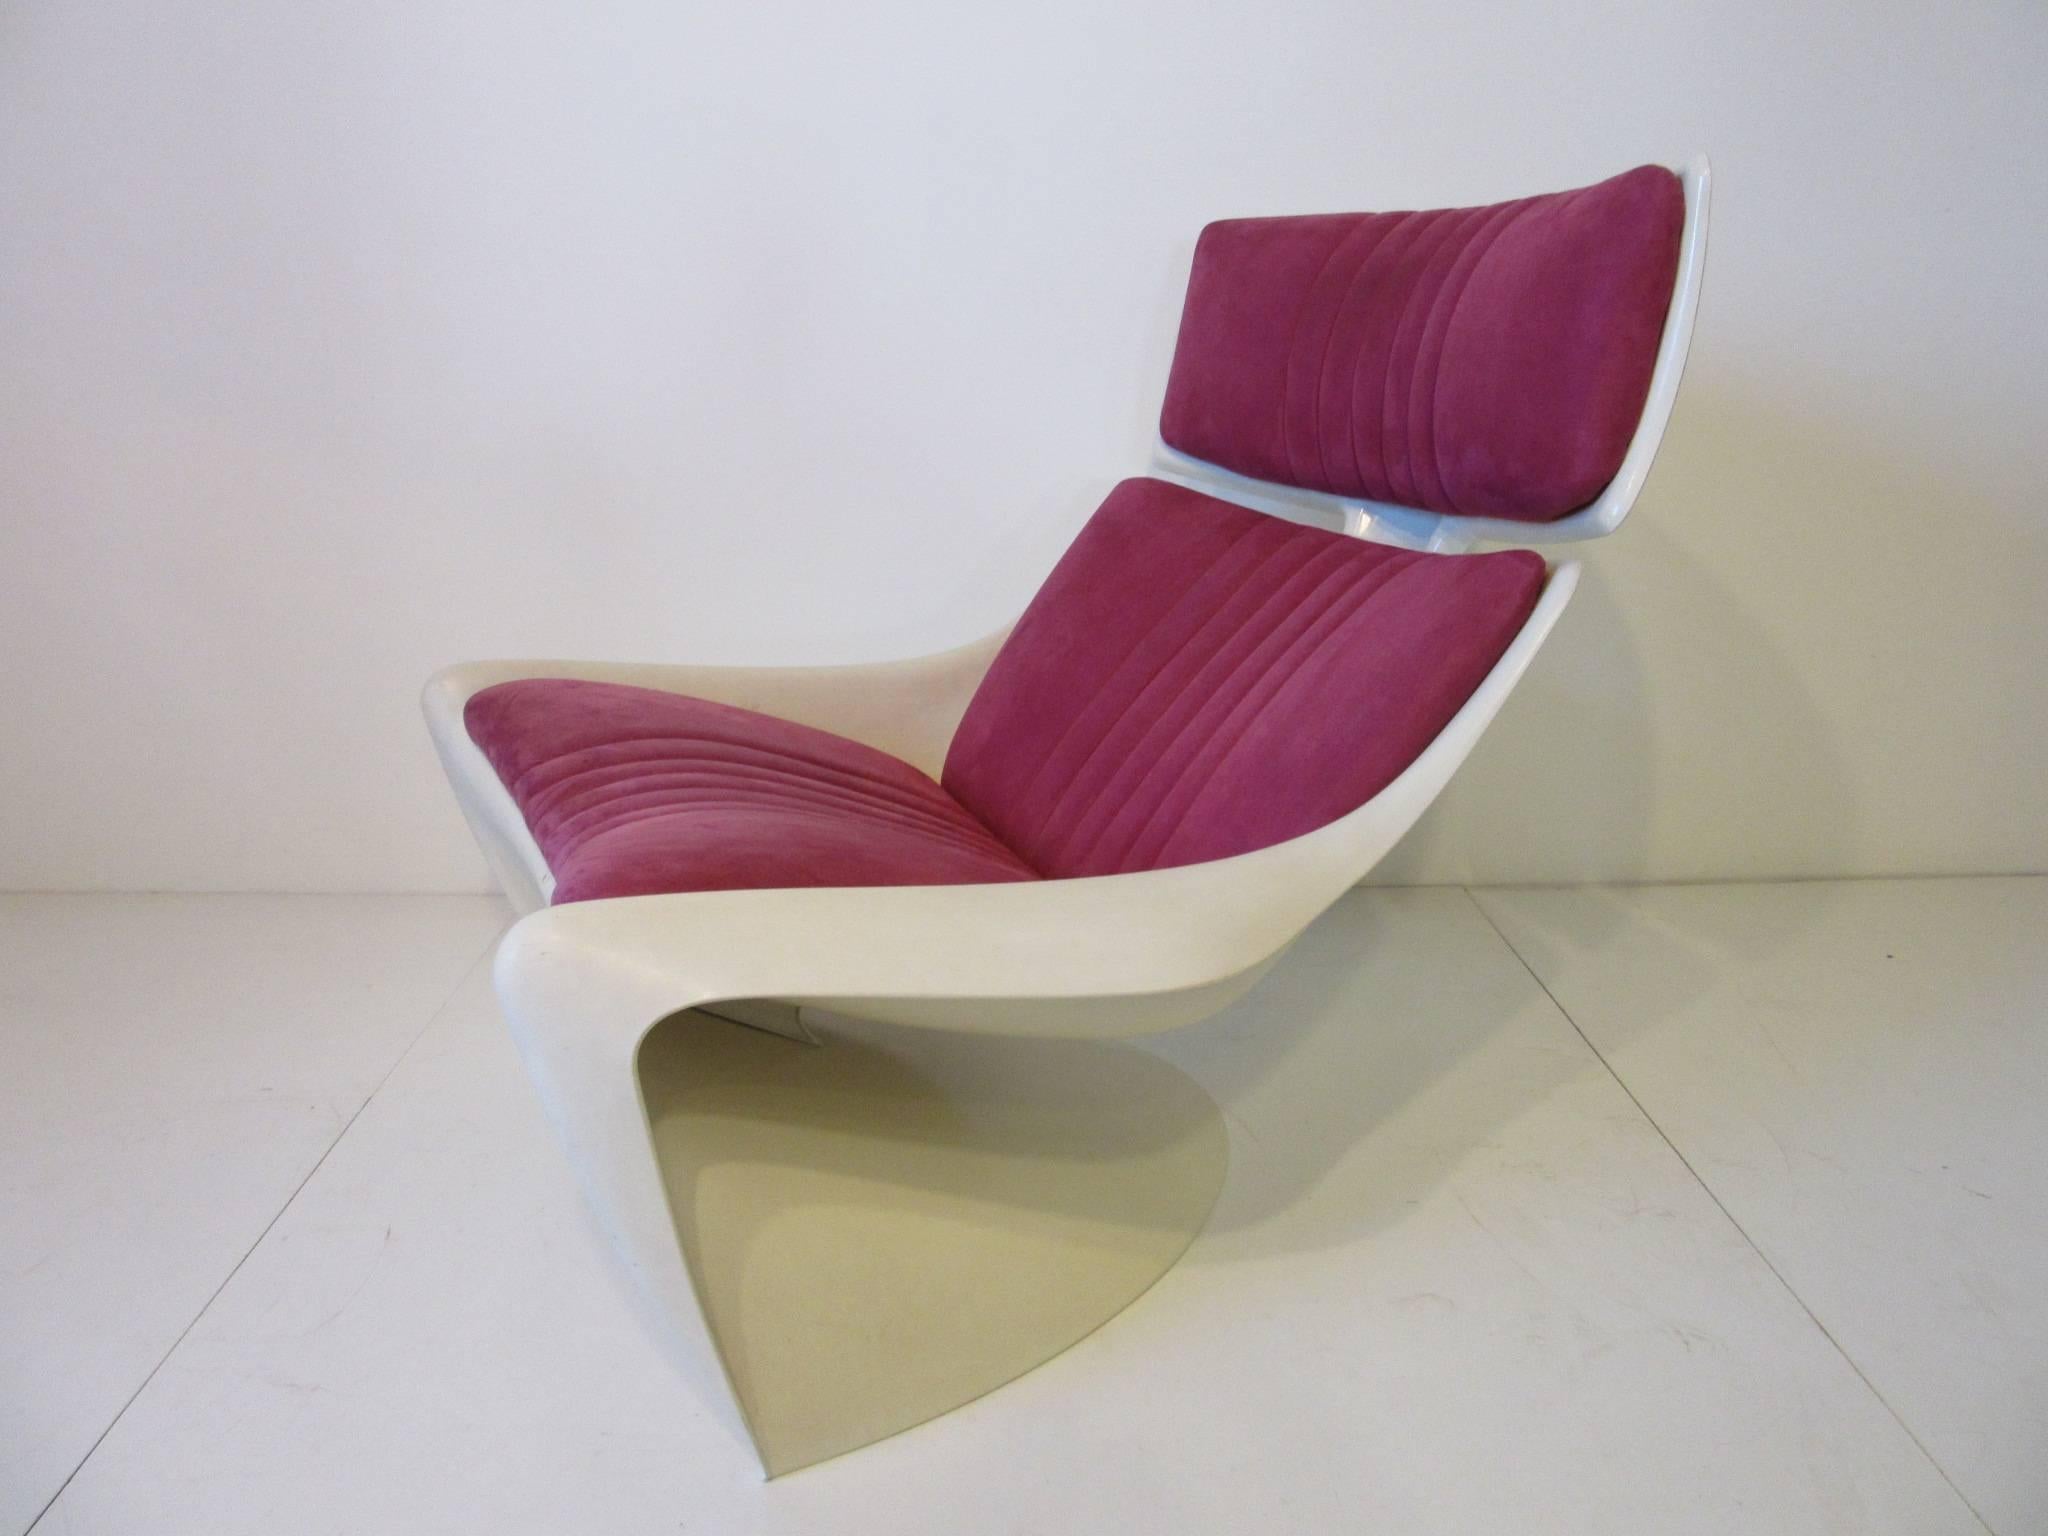 A 1970s ABS molded plastic sculptural Meteor lounge chair with fuchsia ultra suede upholstery, with swept back line designs as if it's floating . The backside has two large machined aluminium knobs crafted by Cado in Denmark and designed by Steen